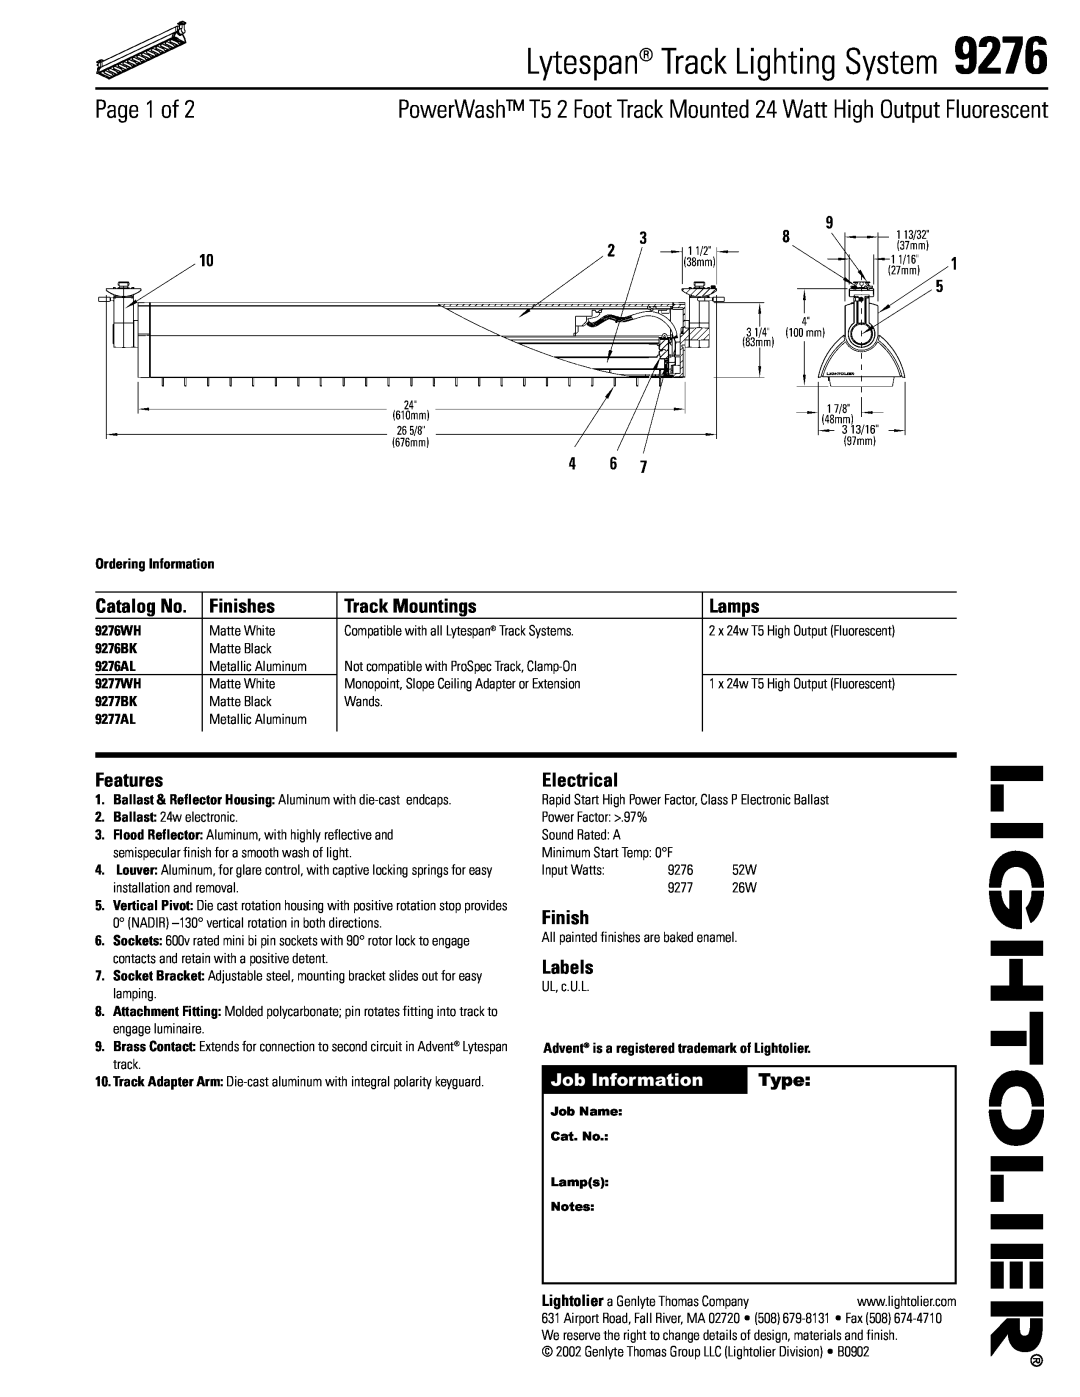 Lightolier 9276 manual Page 1 of, Finishes, Track Mountings, Lamps, Features, Electrical, Labels, Job Information, Type 